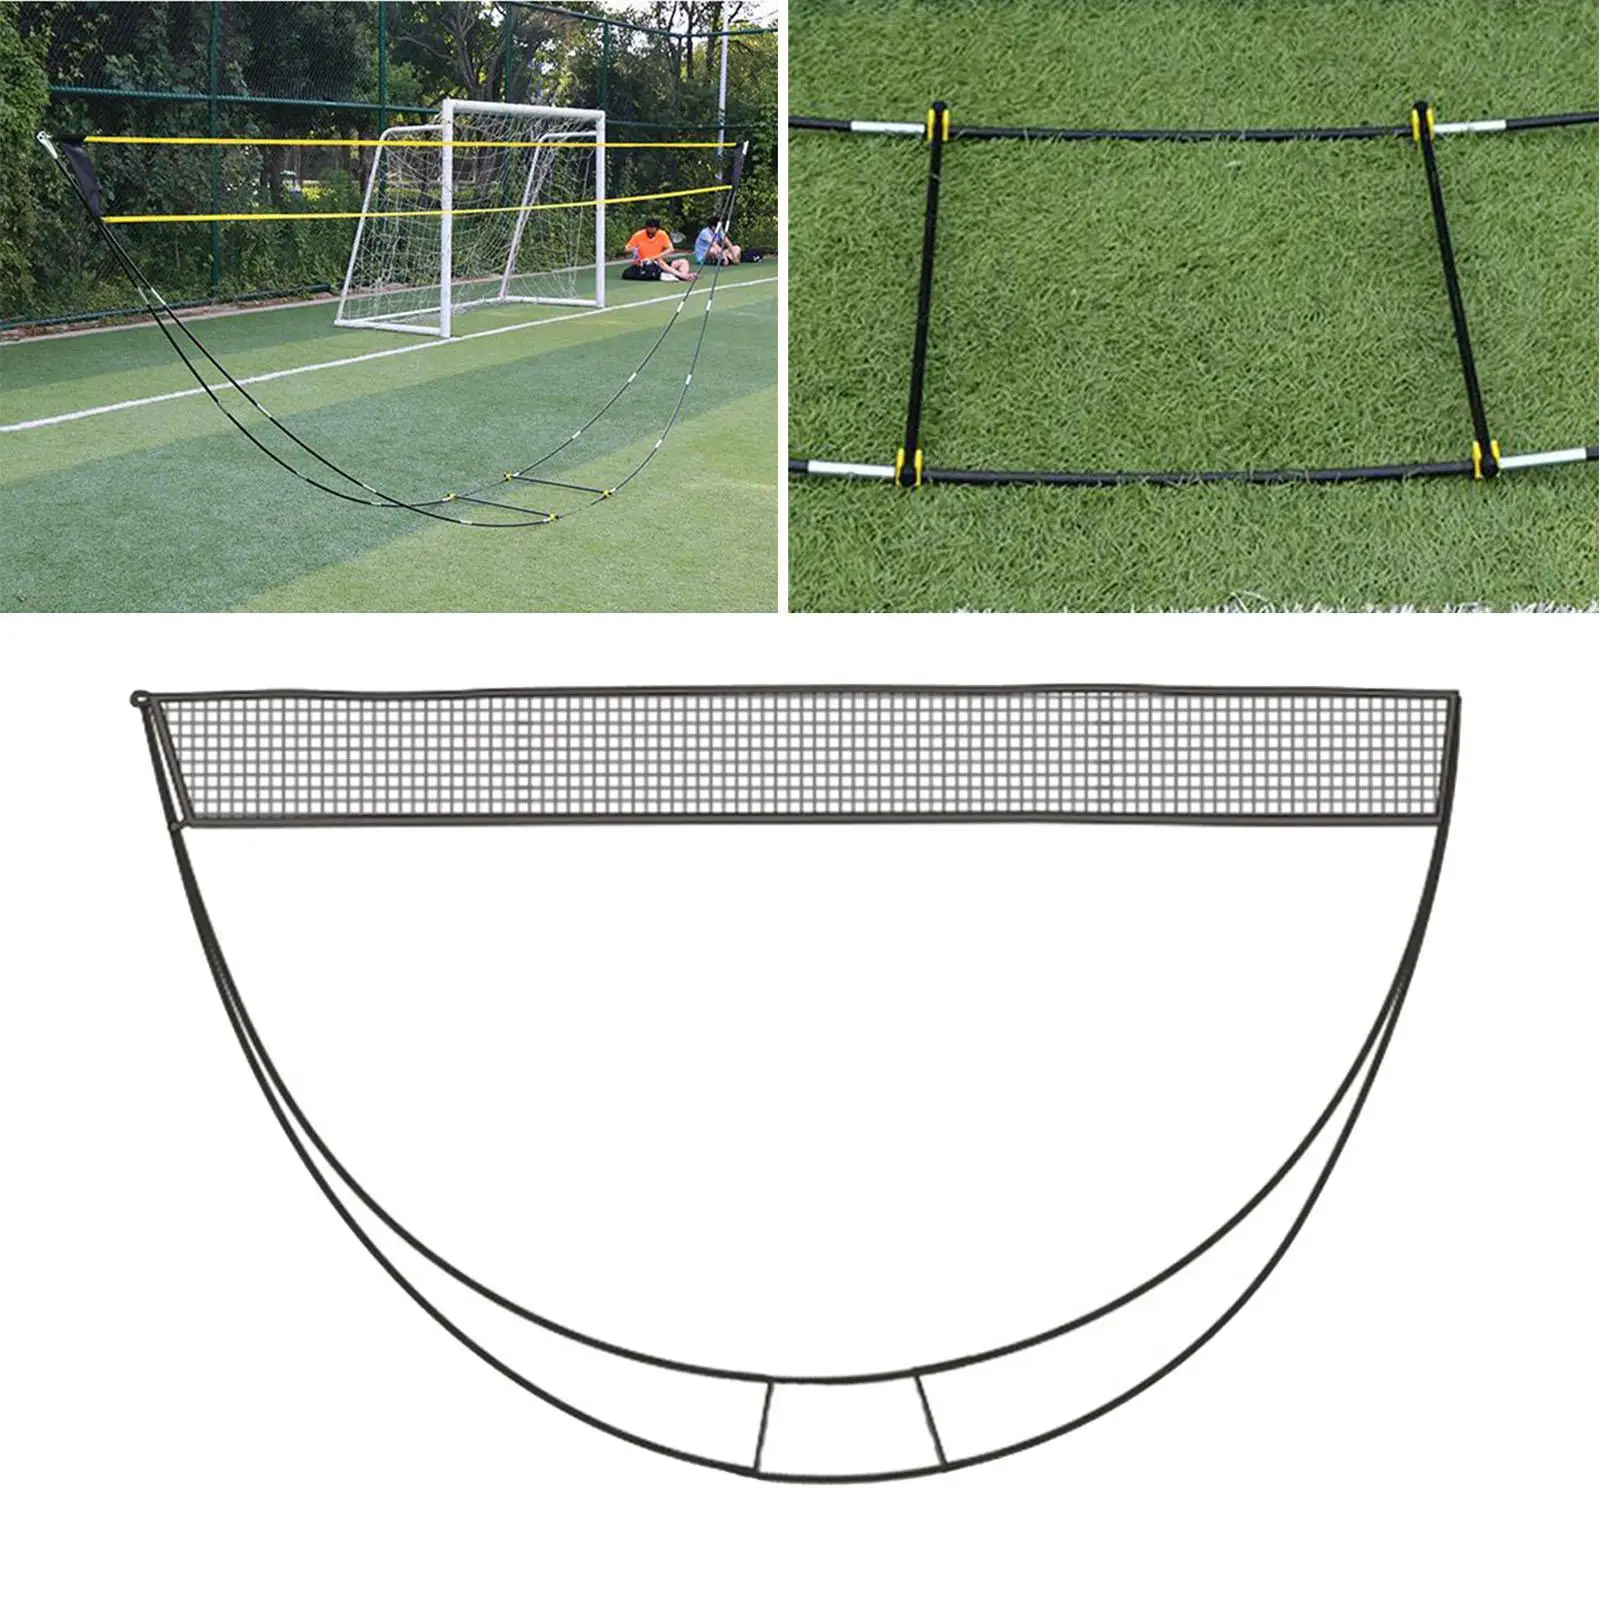 Portable Badminton Net Sets Easy Set Up with Foldable Stand for Street Beach